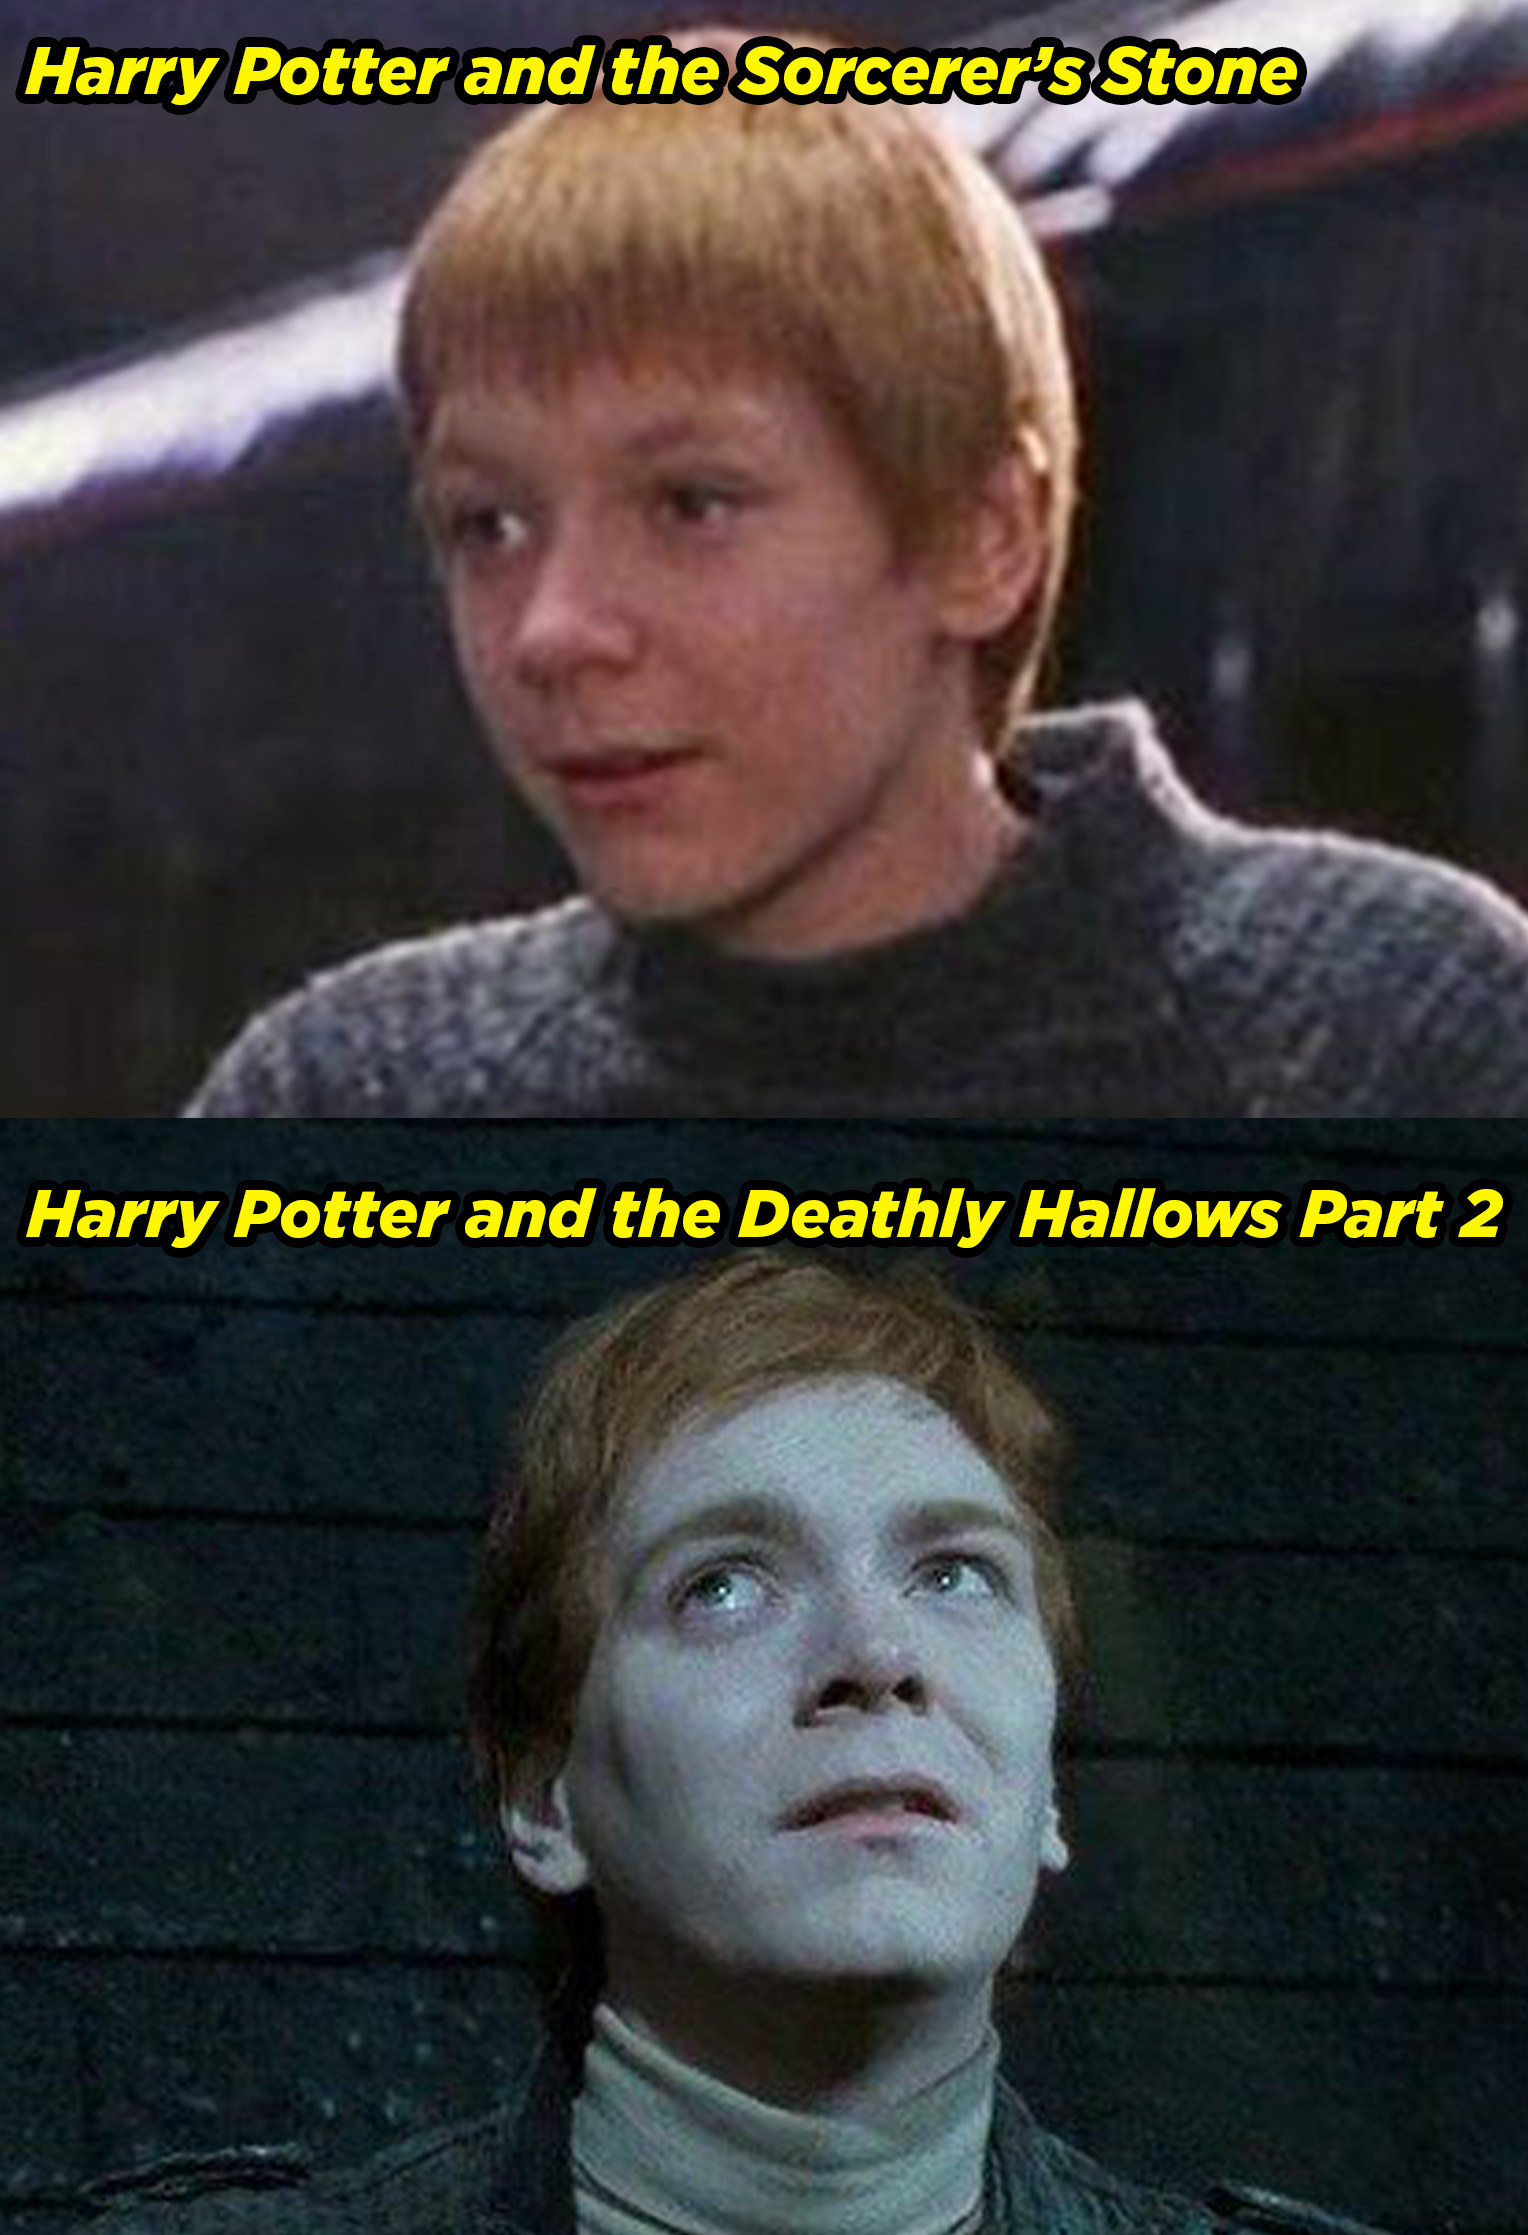 James Phelps in the Sorcerer&#x27;s Stone and Deathly Hallows Part 2